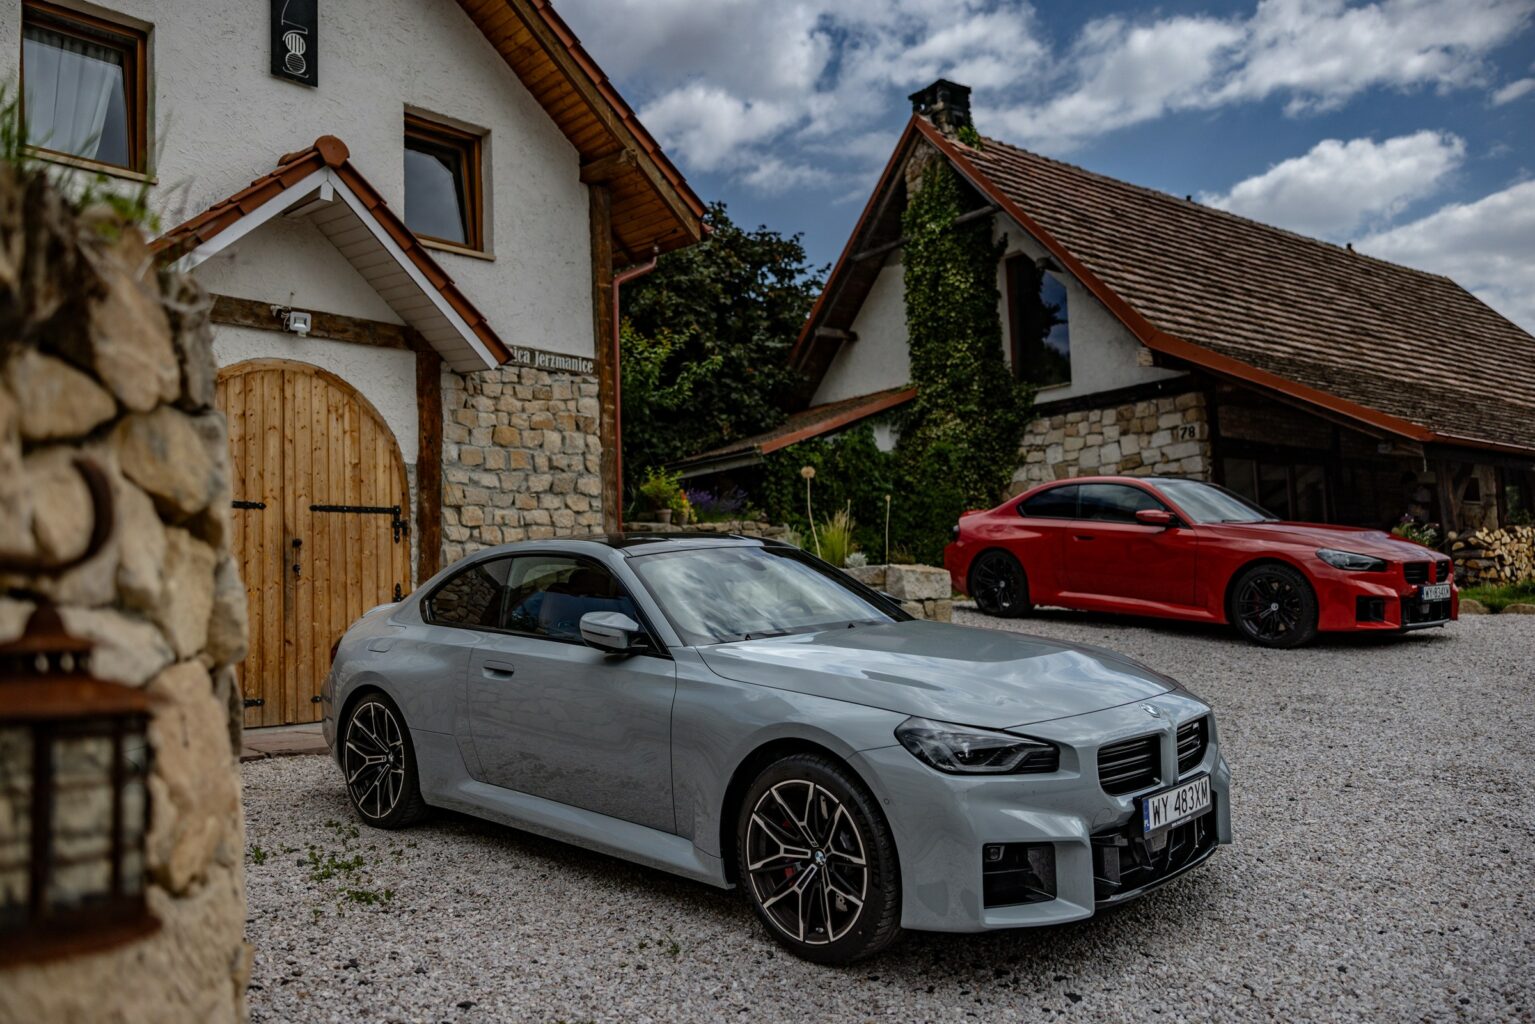 2023 BMW M2 Stuns in Countryside Shoot with Toronto Red and Brooklyn Grey